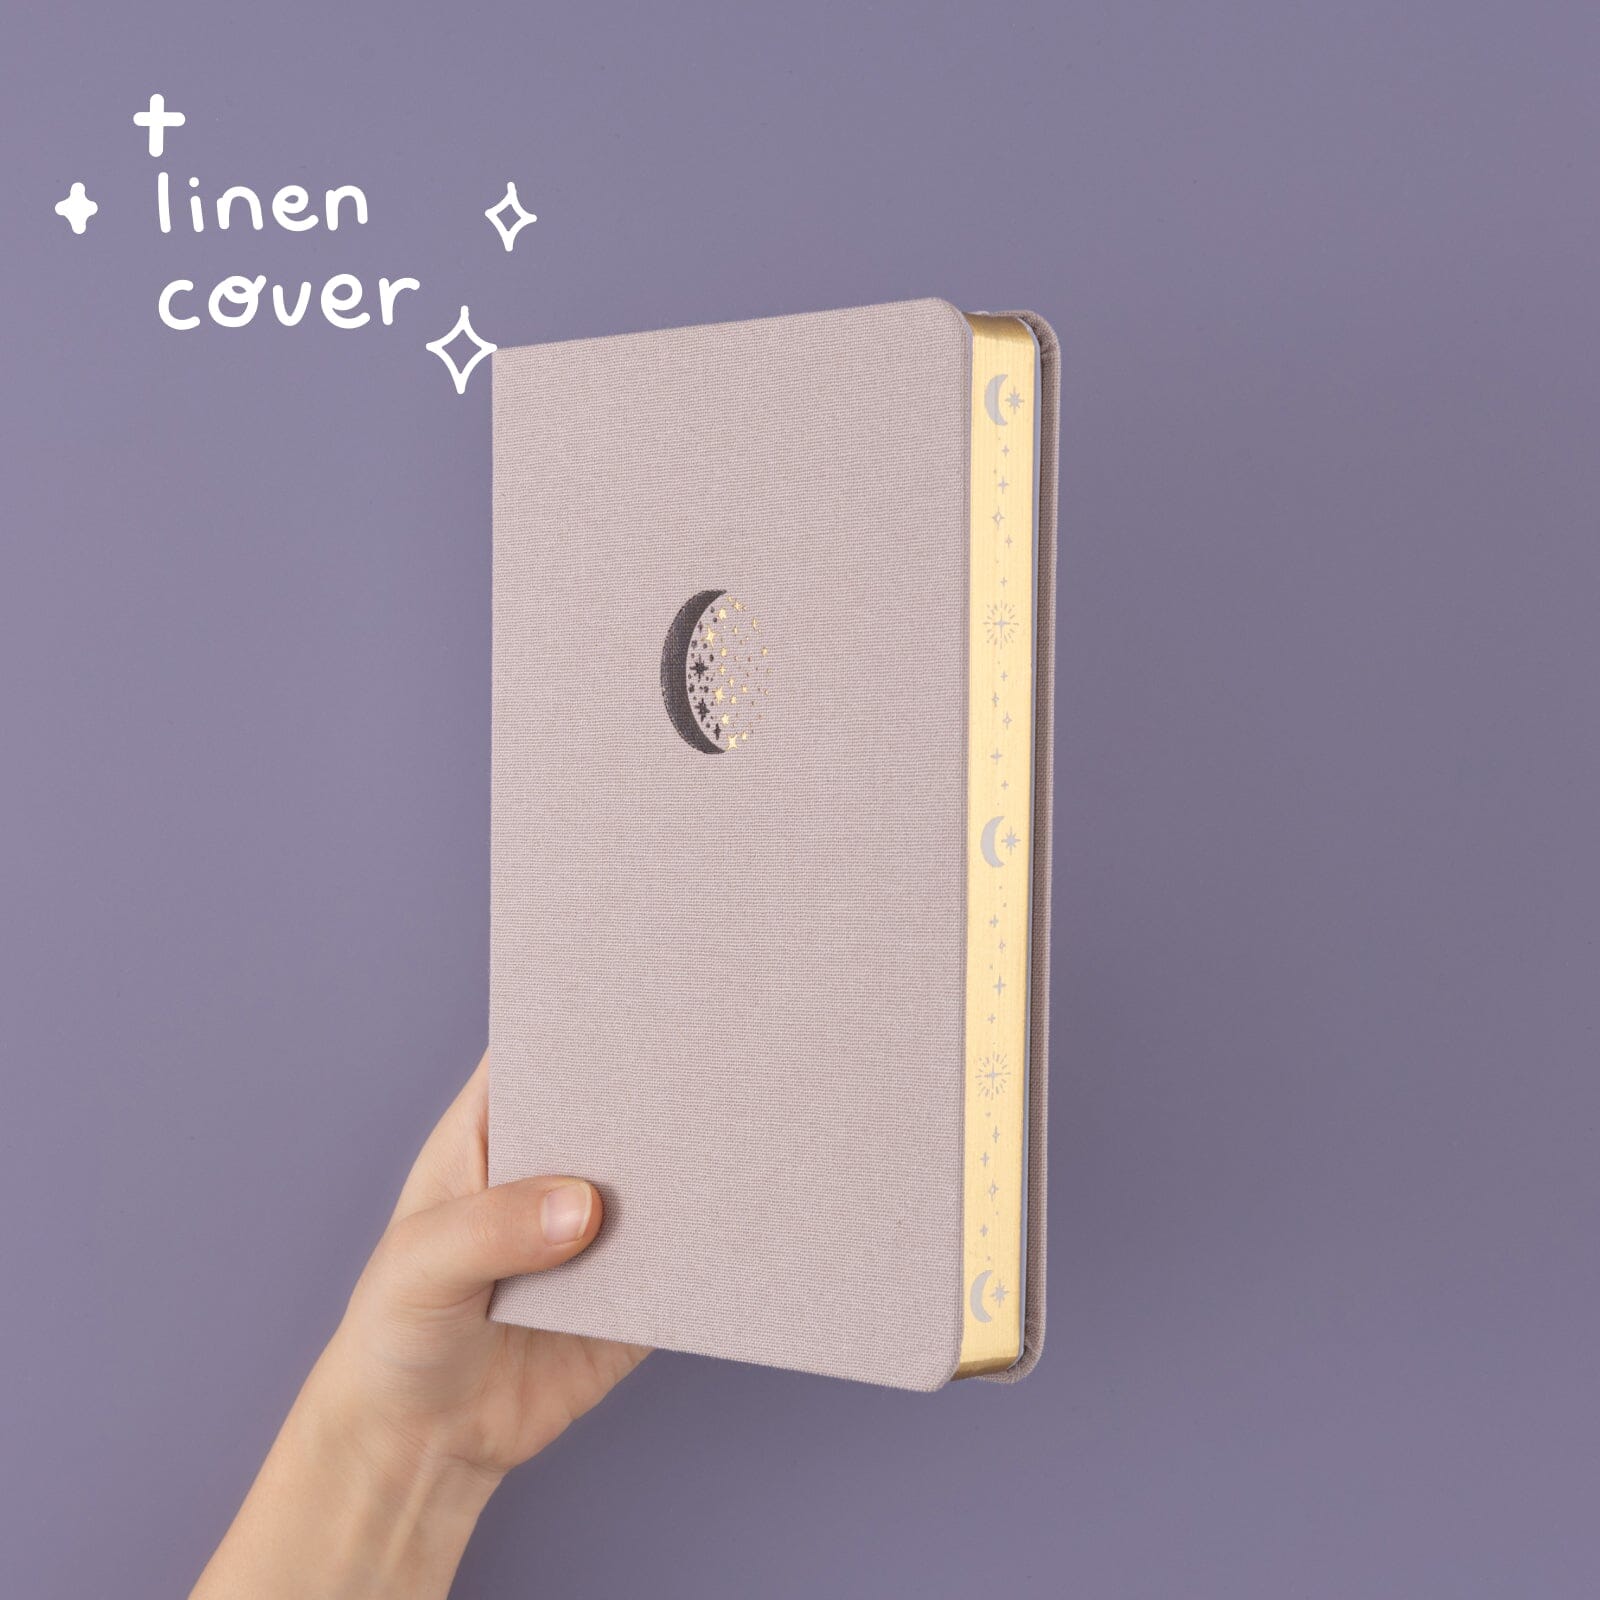 Tsuki 'La Luna' Collector's Edition Moon Planner Bullet Journal ☾ –  NotebookTherapy